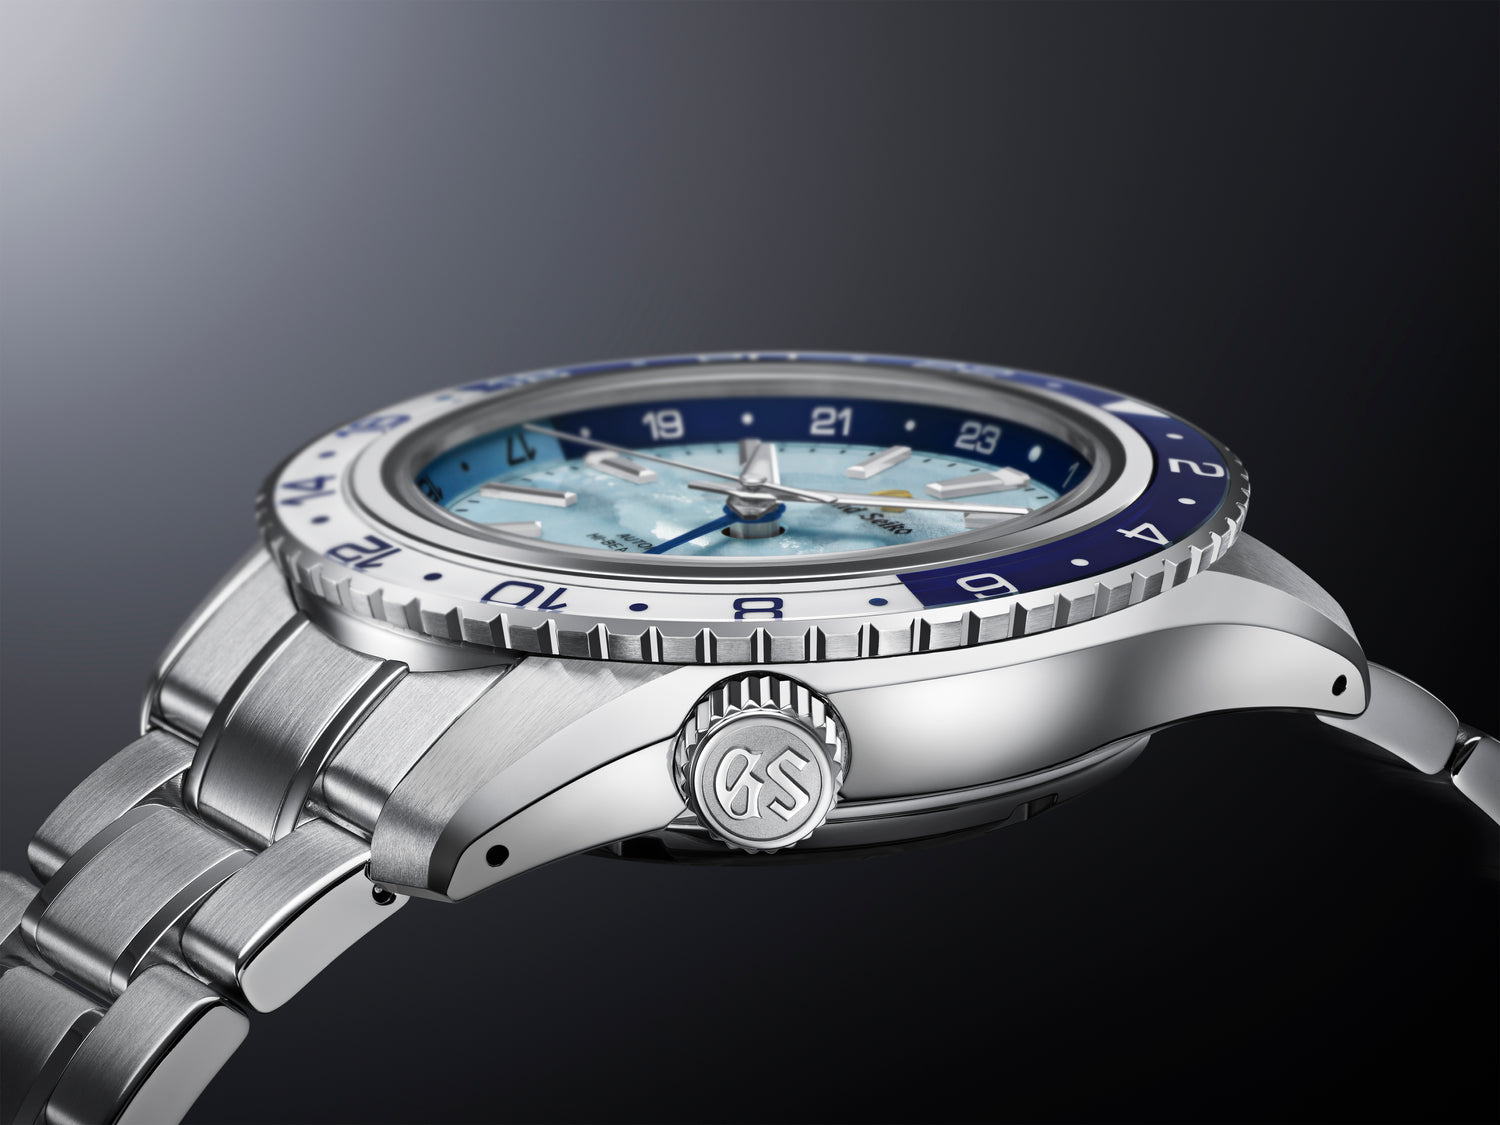 SBGJ275 - LIMITED EDITION AUTOMATIC HI-BEAT 36000 GMT